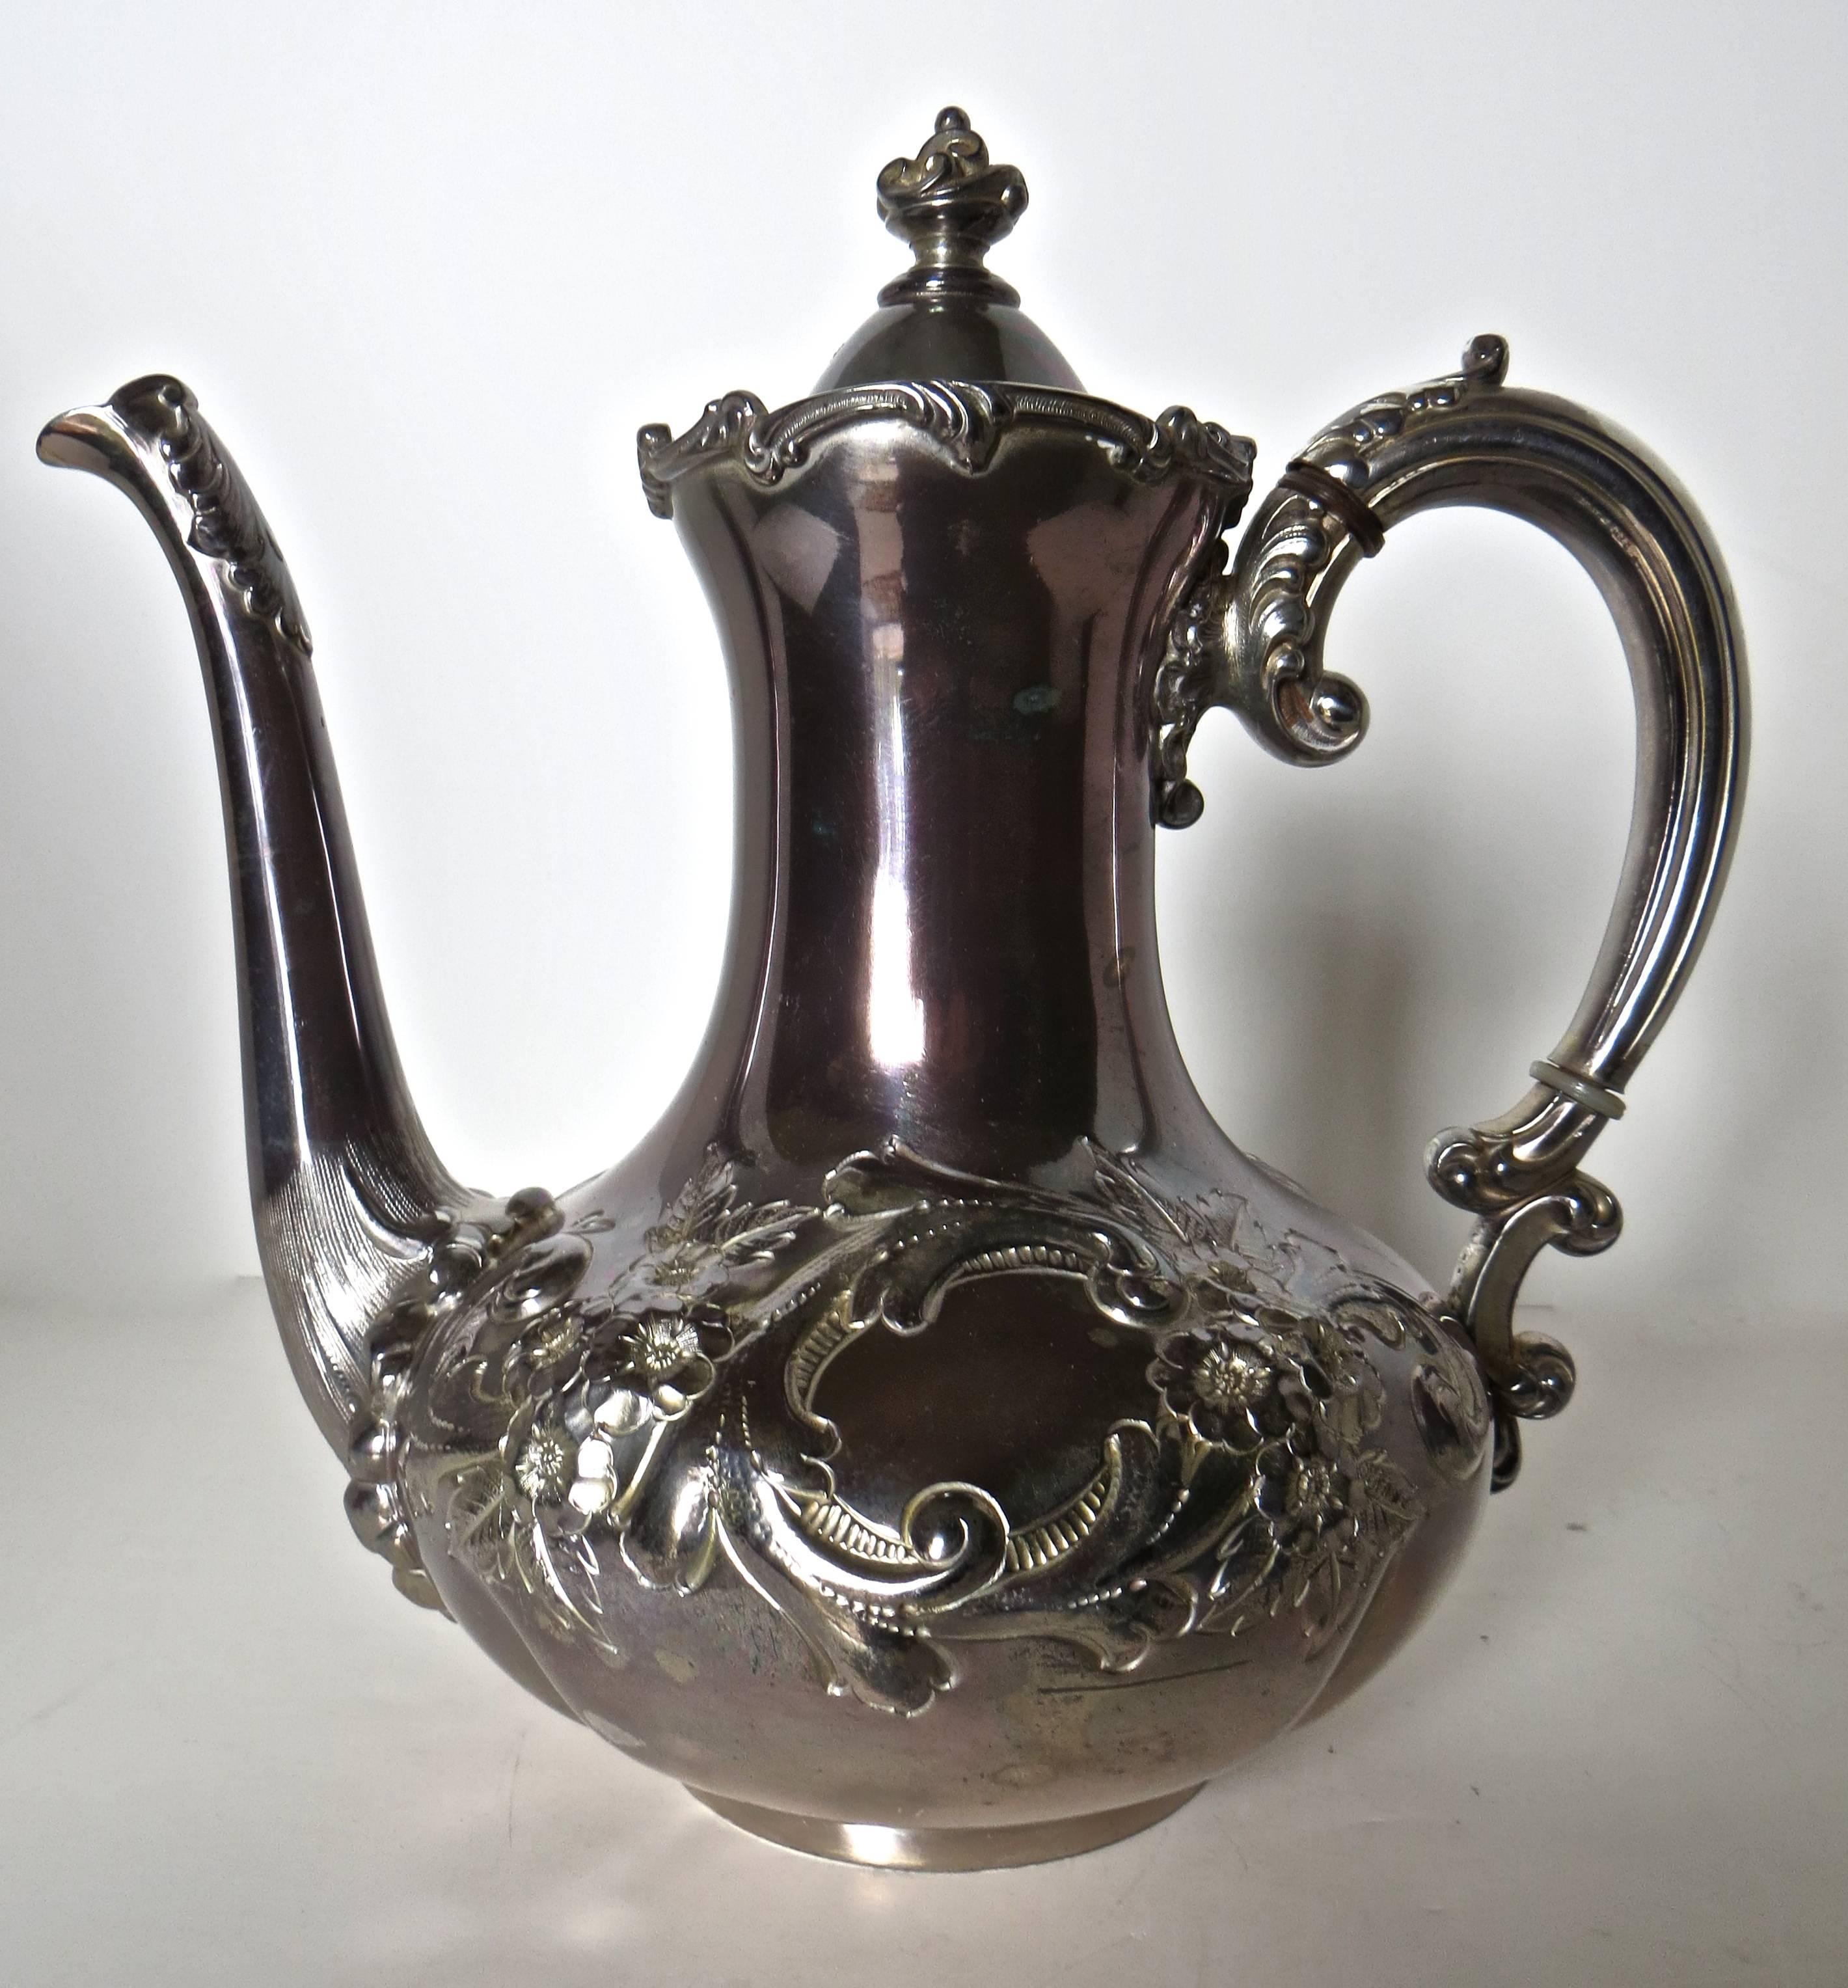 Victorian silver plated tea service with heavy repousse Art Nouveau floral decorations of flowers and vines. The pieces consist of the following:

Tea pot 9